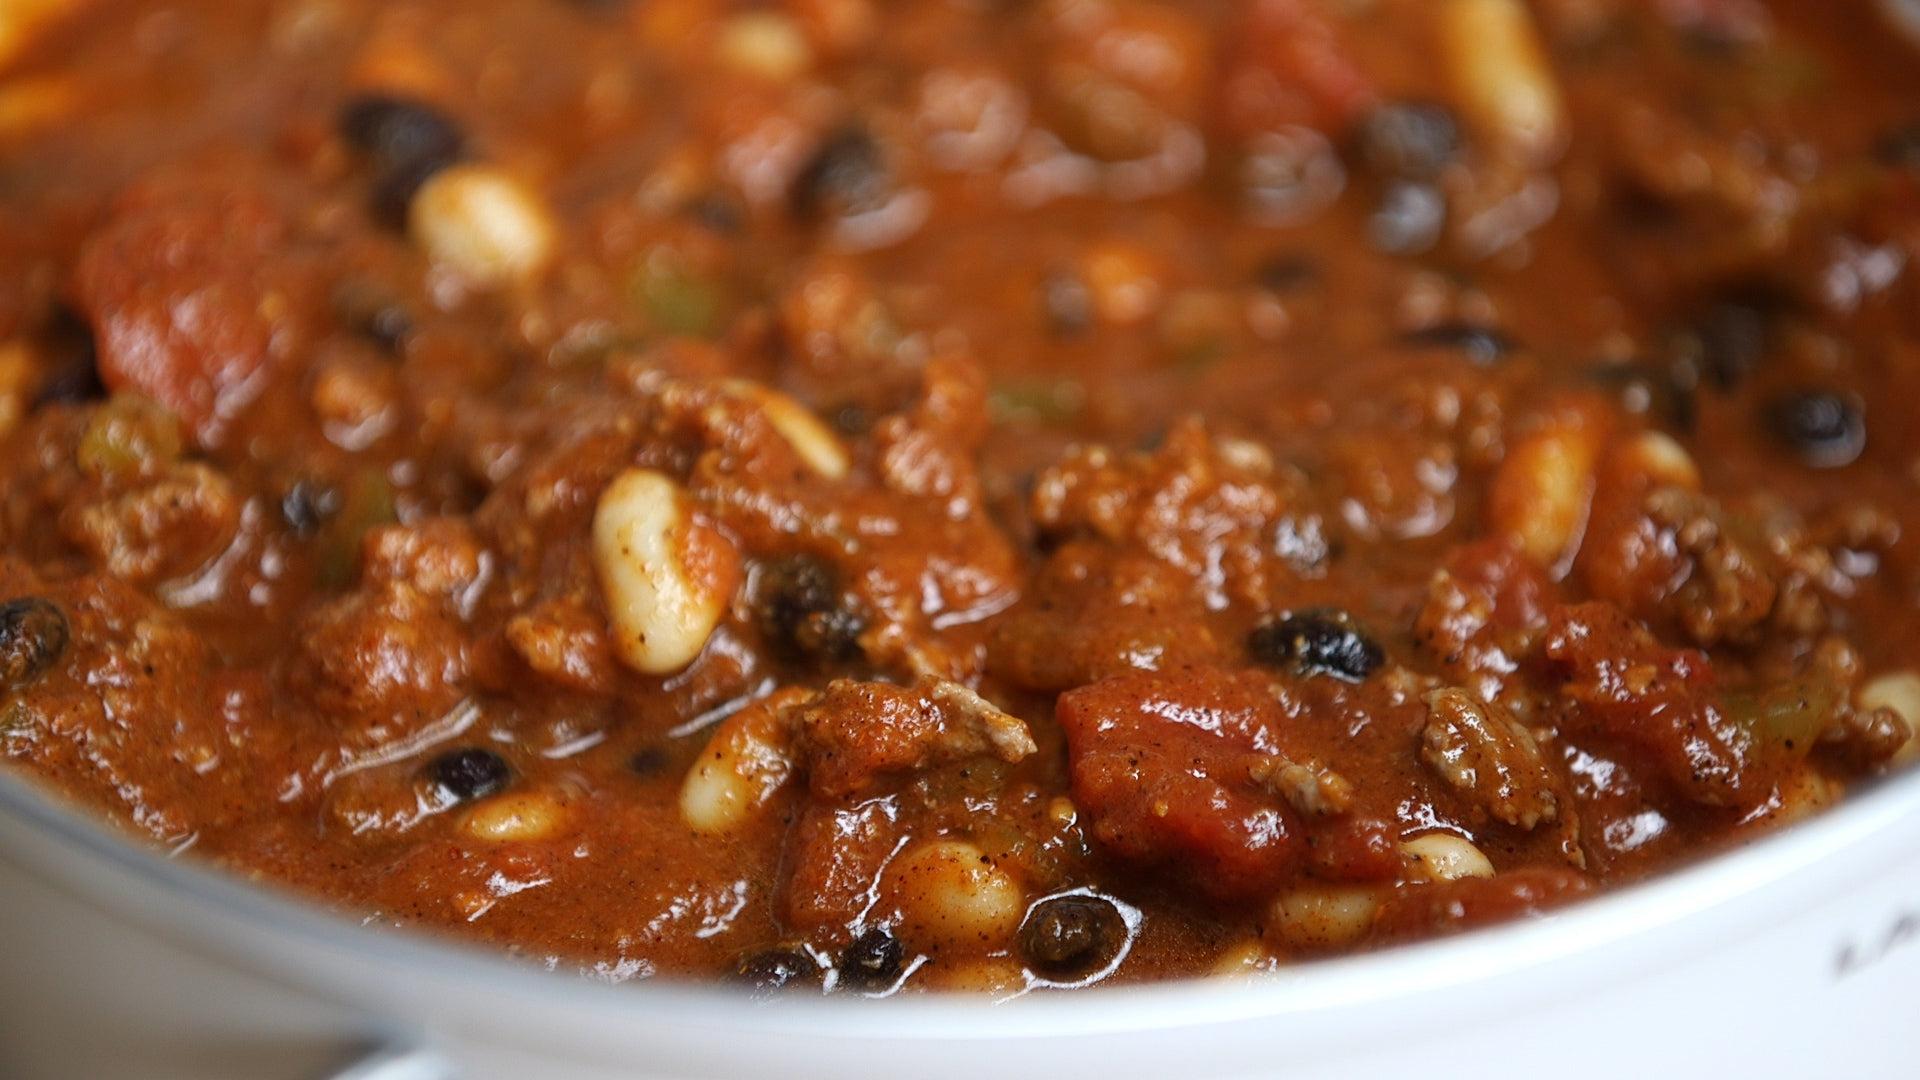 Chili in a crock pot or slow cooker